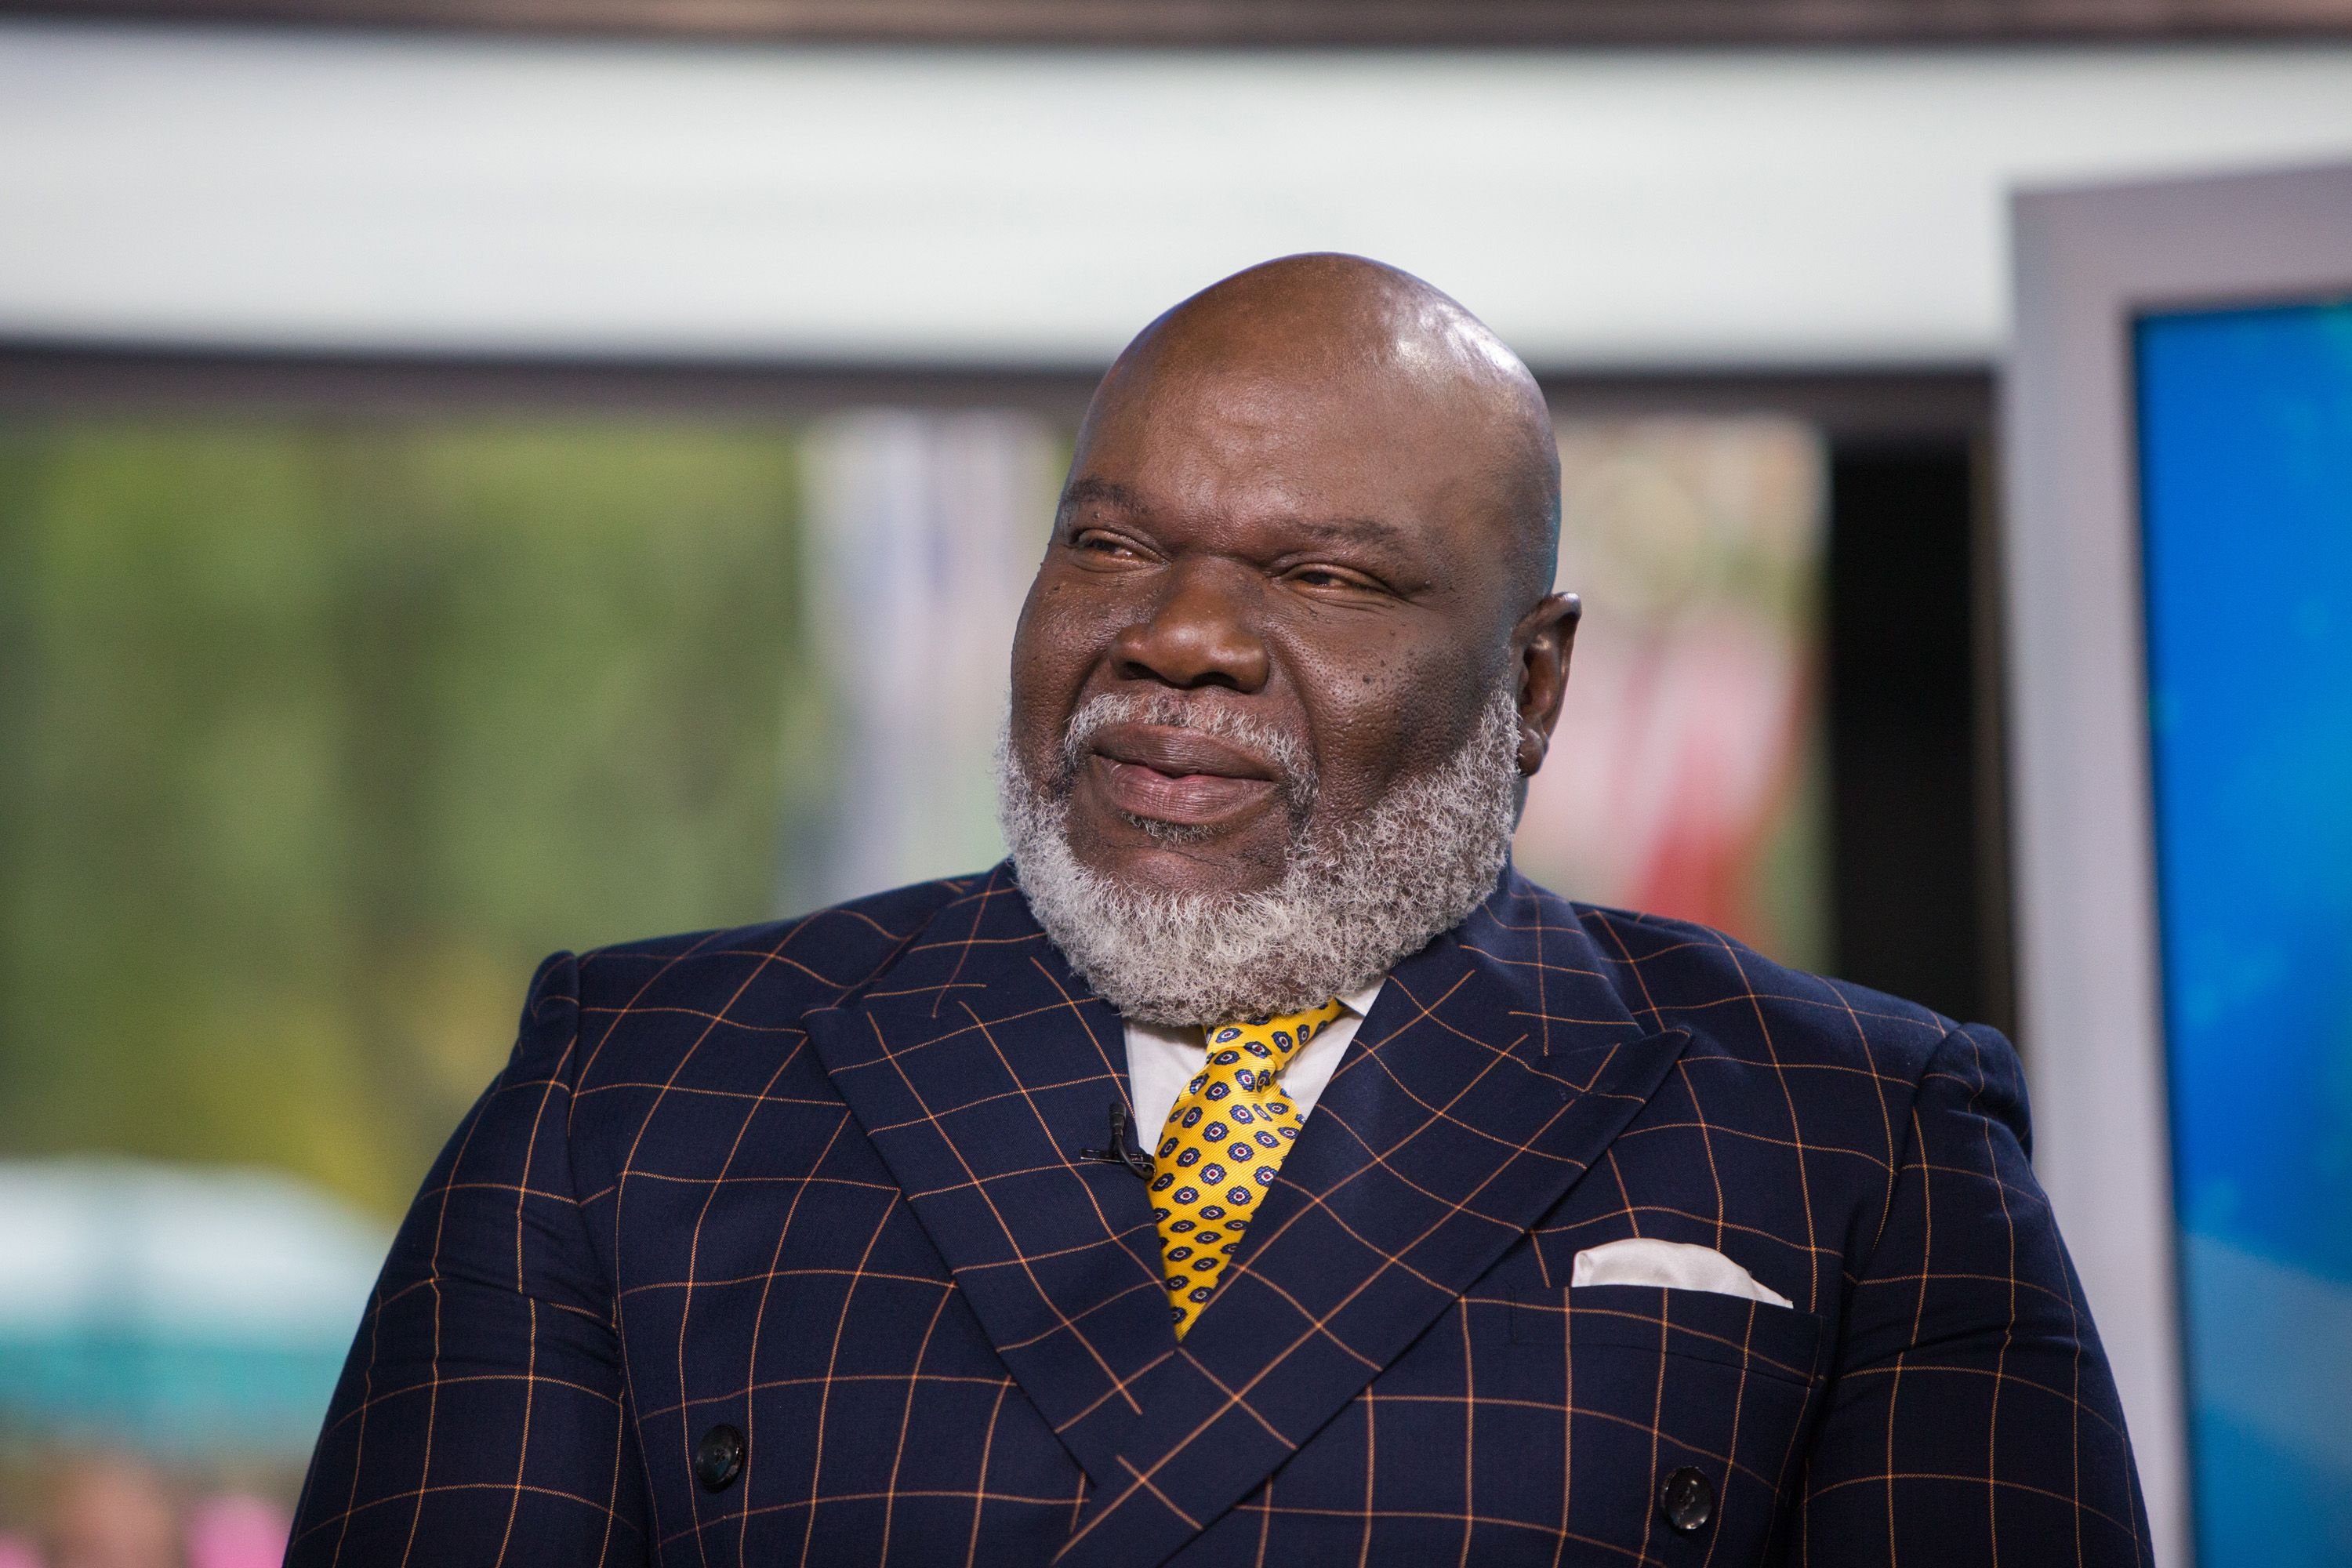 Bishop T.D. Jakes speaks in a television interview on October 9, 2017 at the NBCUniversal Network. | Photo: Getty Images